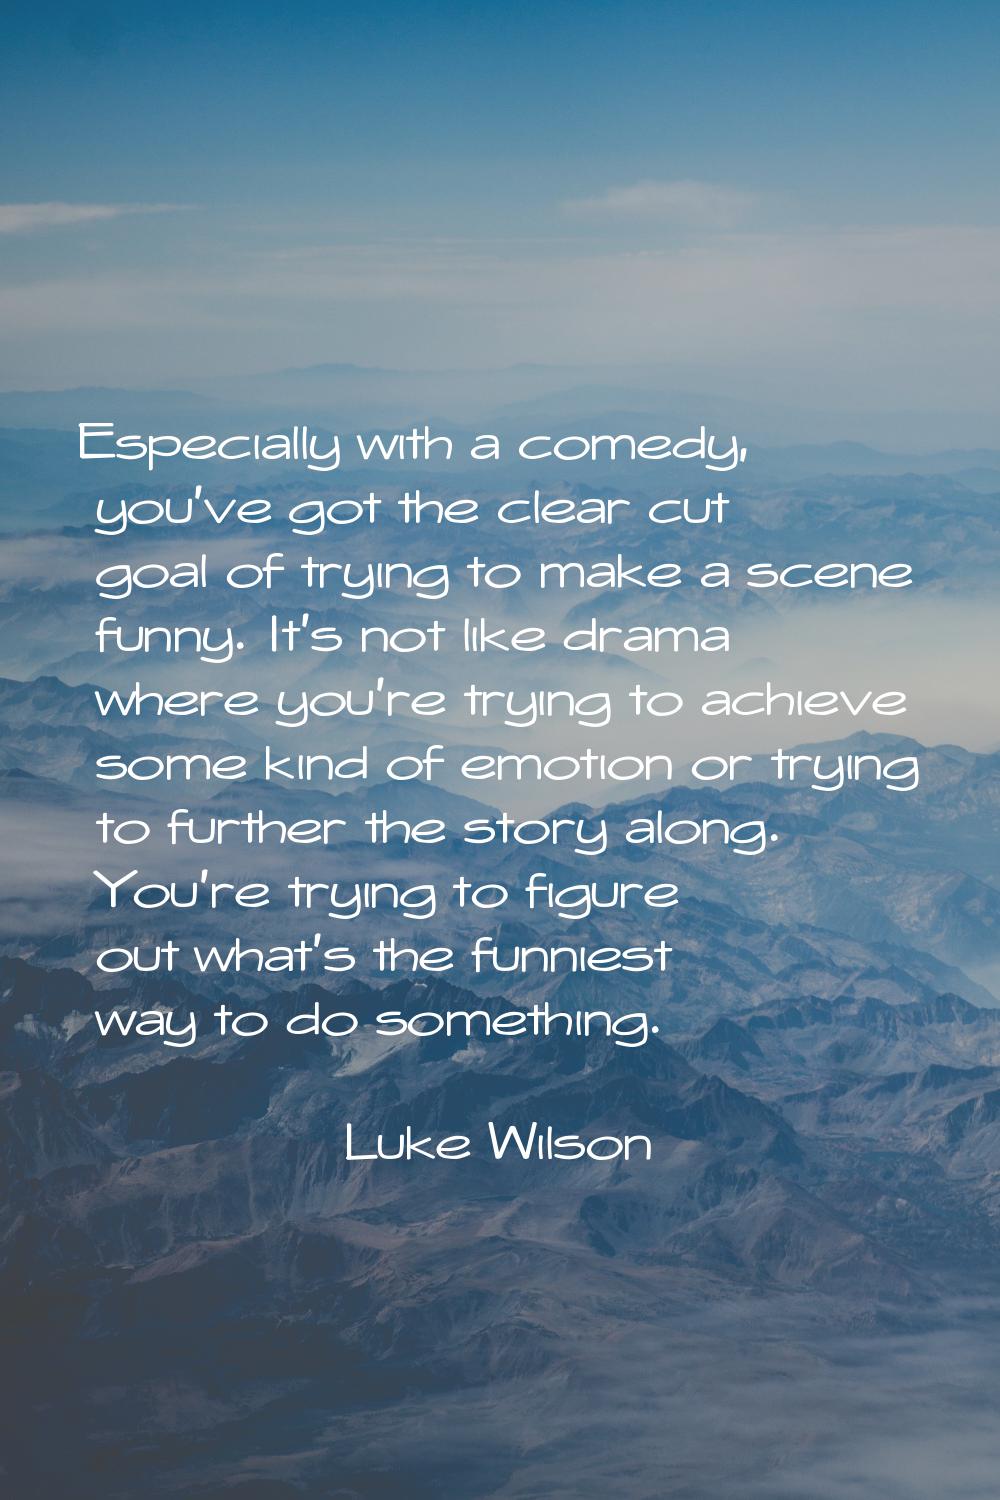 Especially with a comedy, you've got the clear cut goal of trying to make a scene funny. It's not l